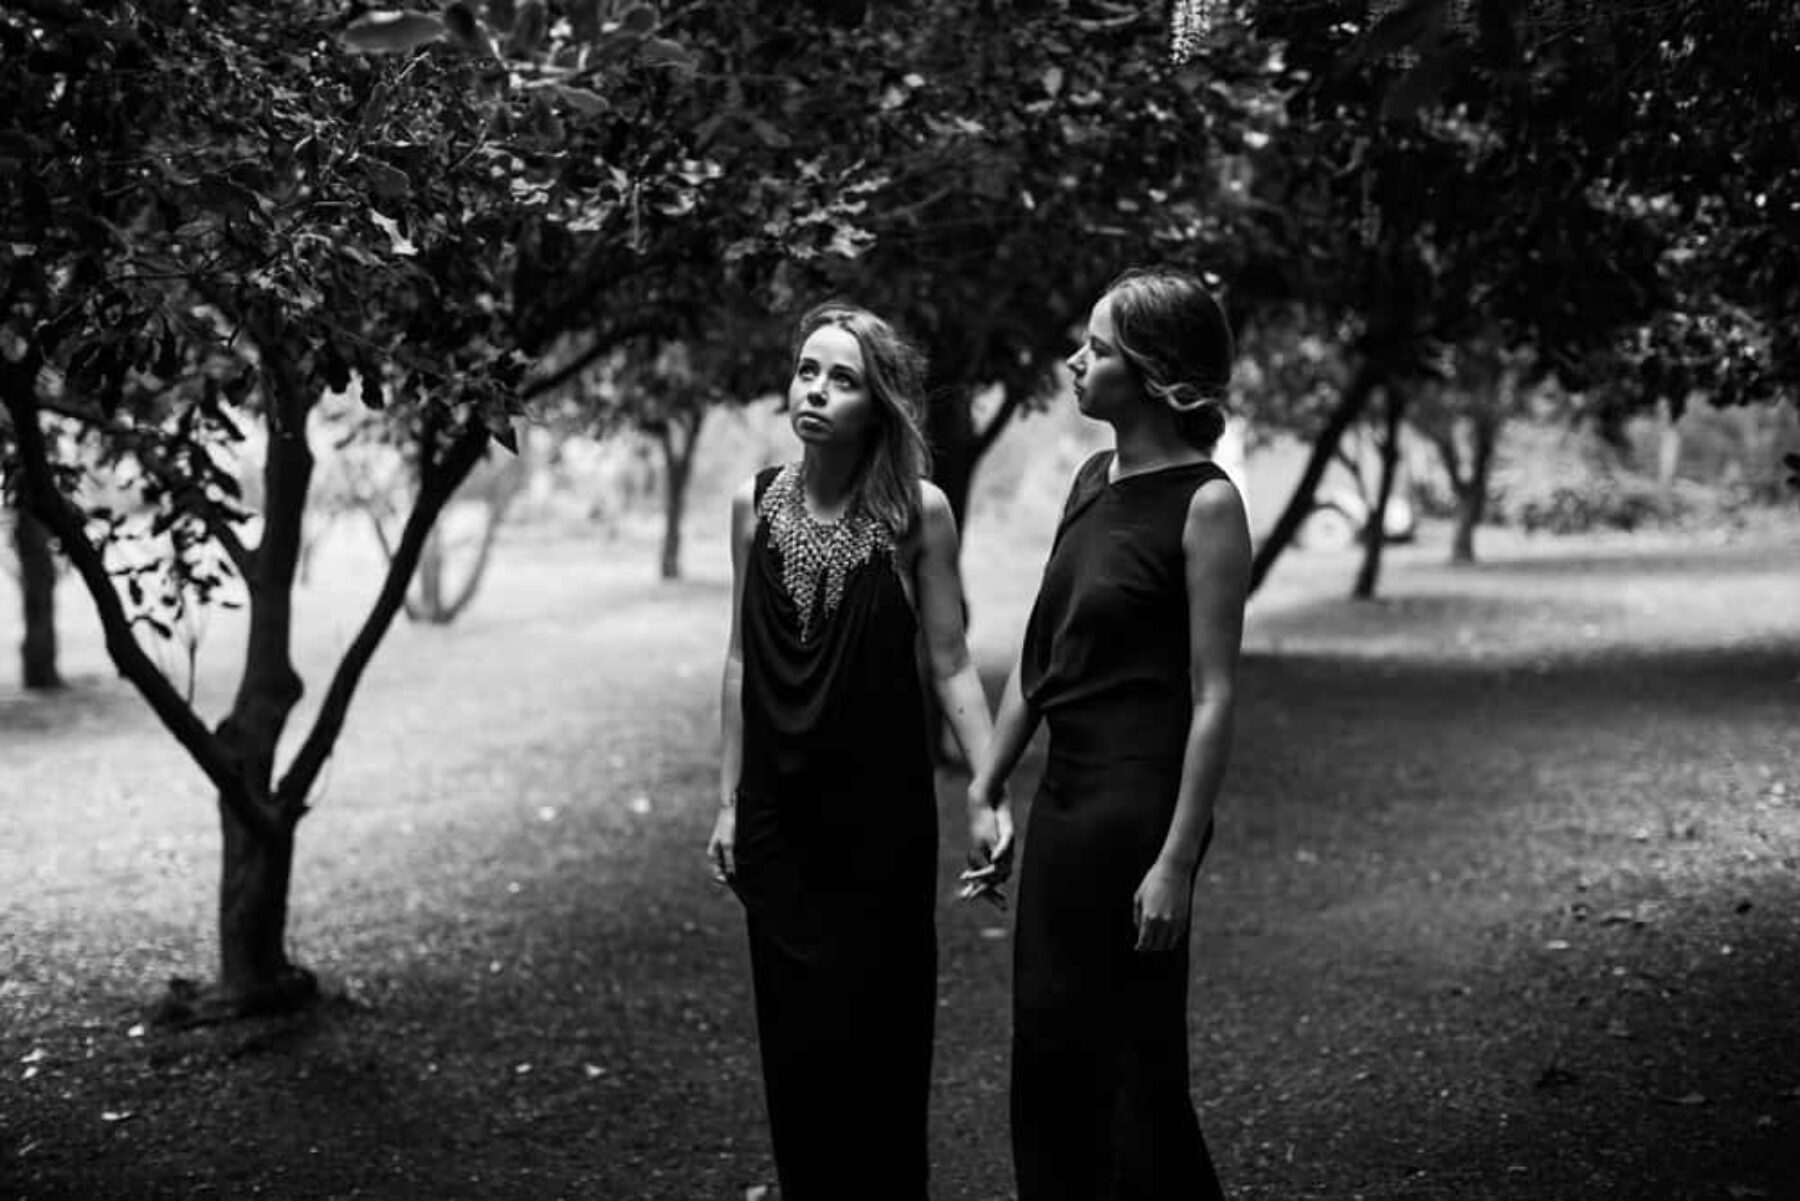 Black dresses by One Fell Swoop